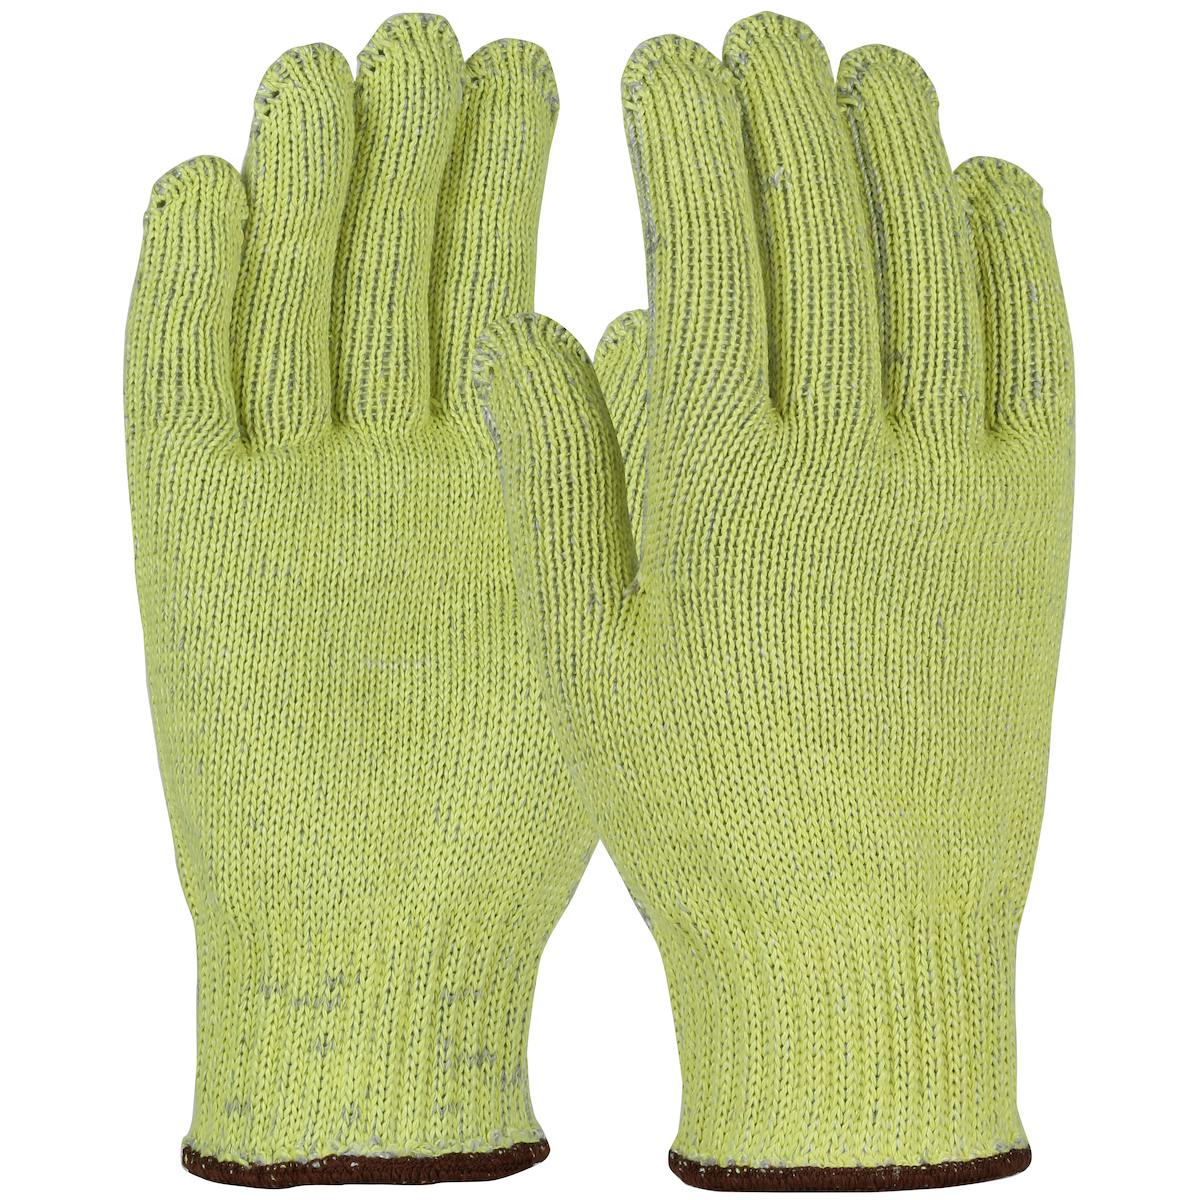 Kut Gard® Seamless Knit ATA® / Aramid Blended Glove with Cotton/Polyester Plating - Heavy Weight (MATA501)_0